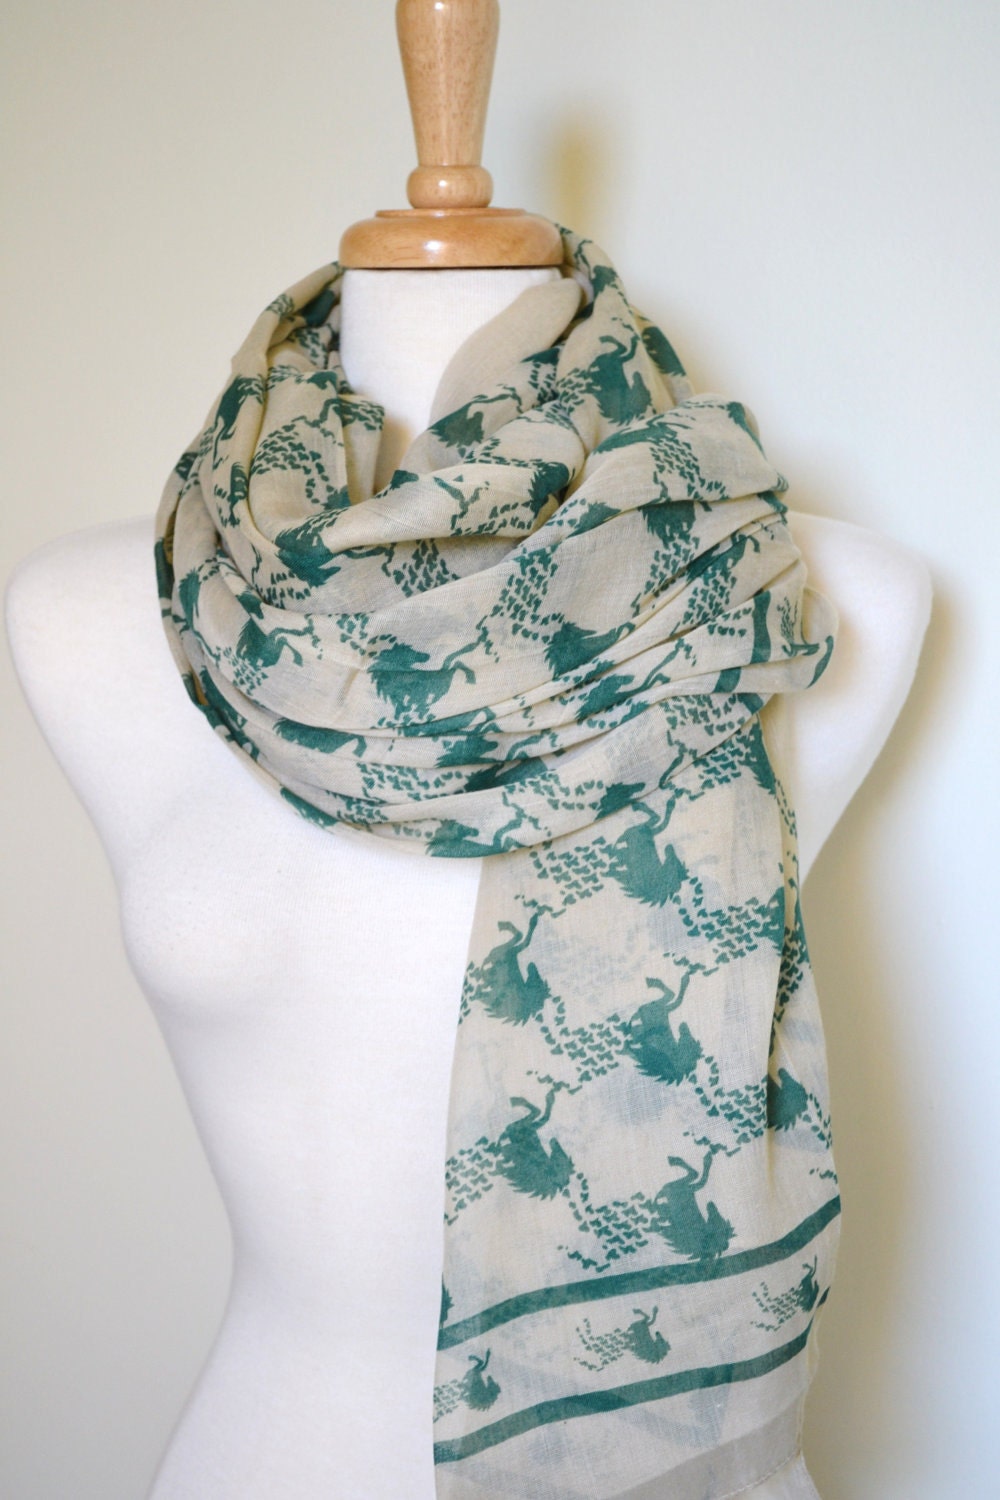 Scarf with images of green horses